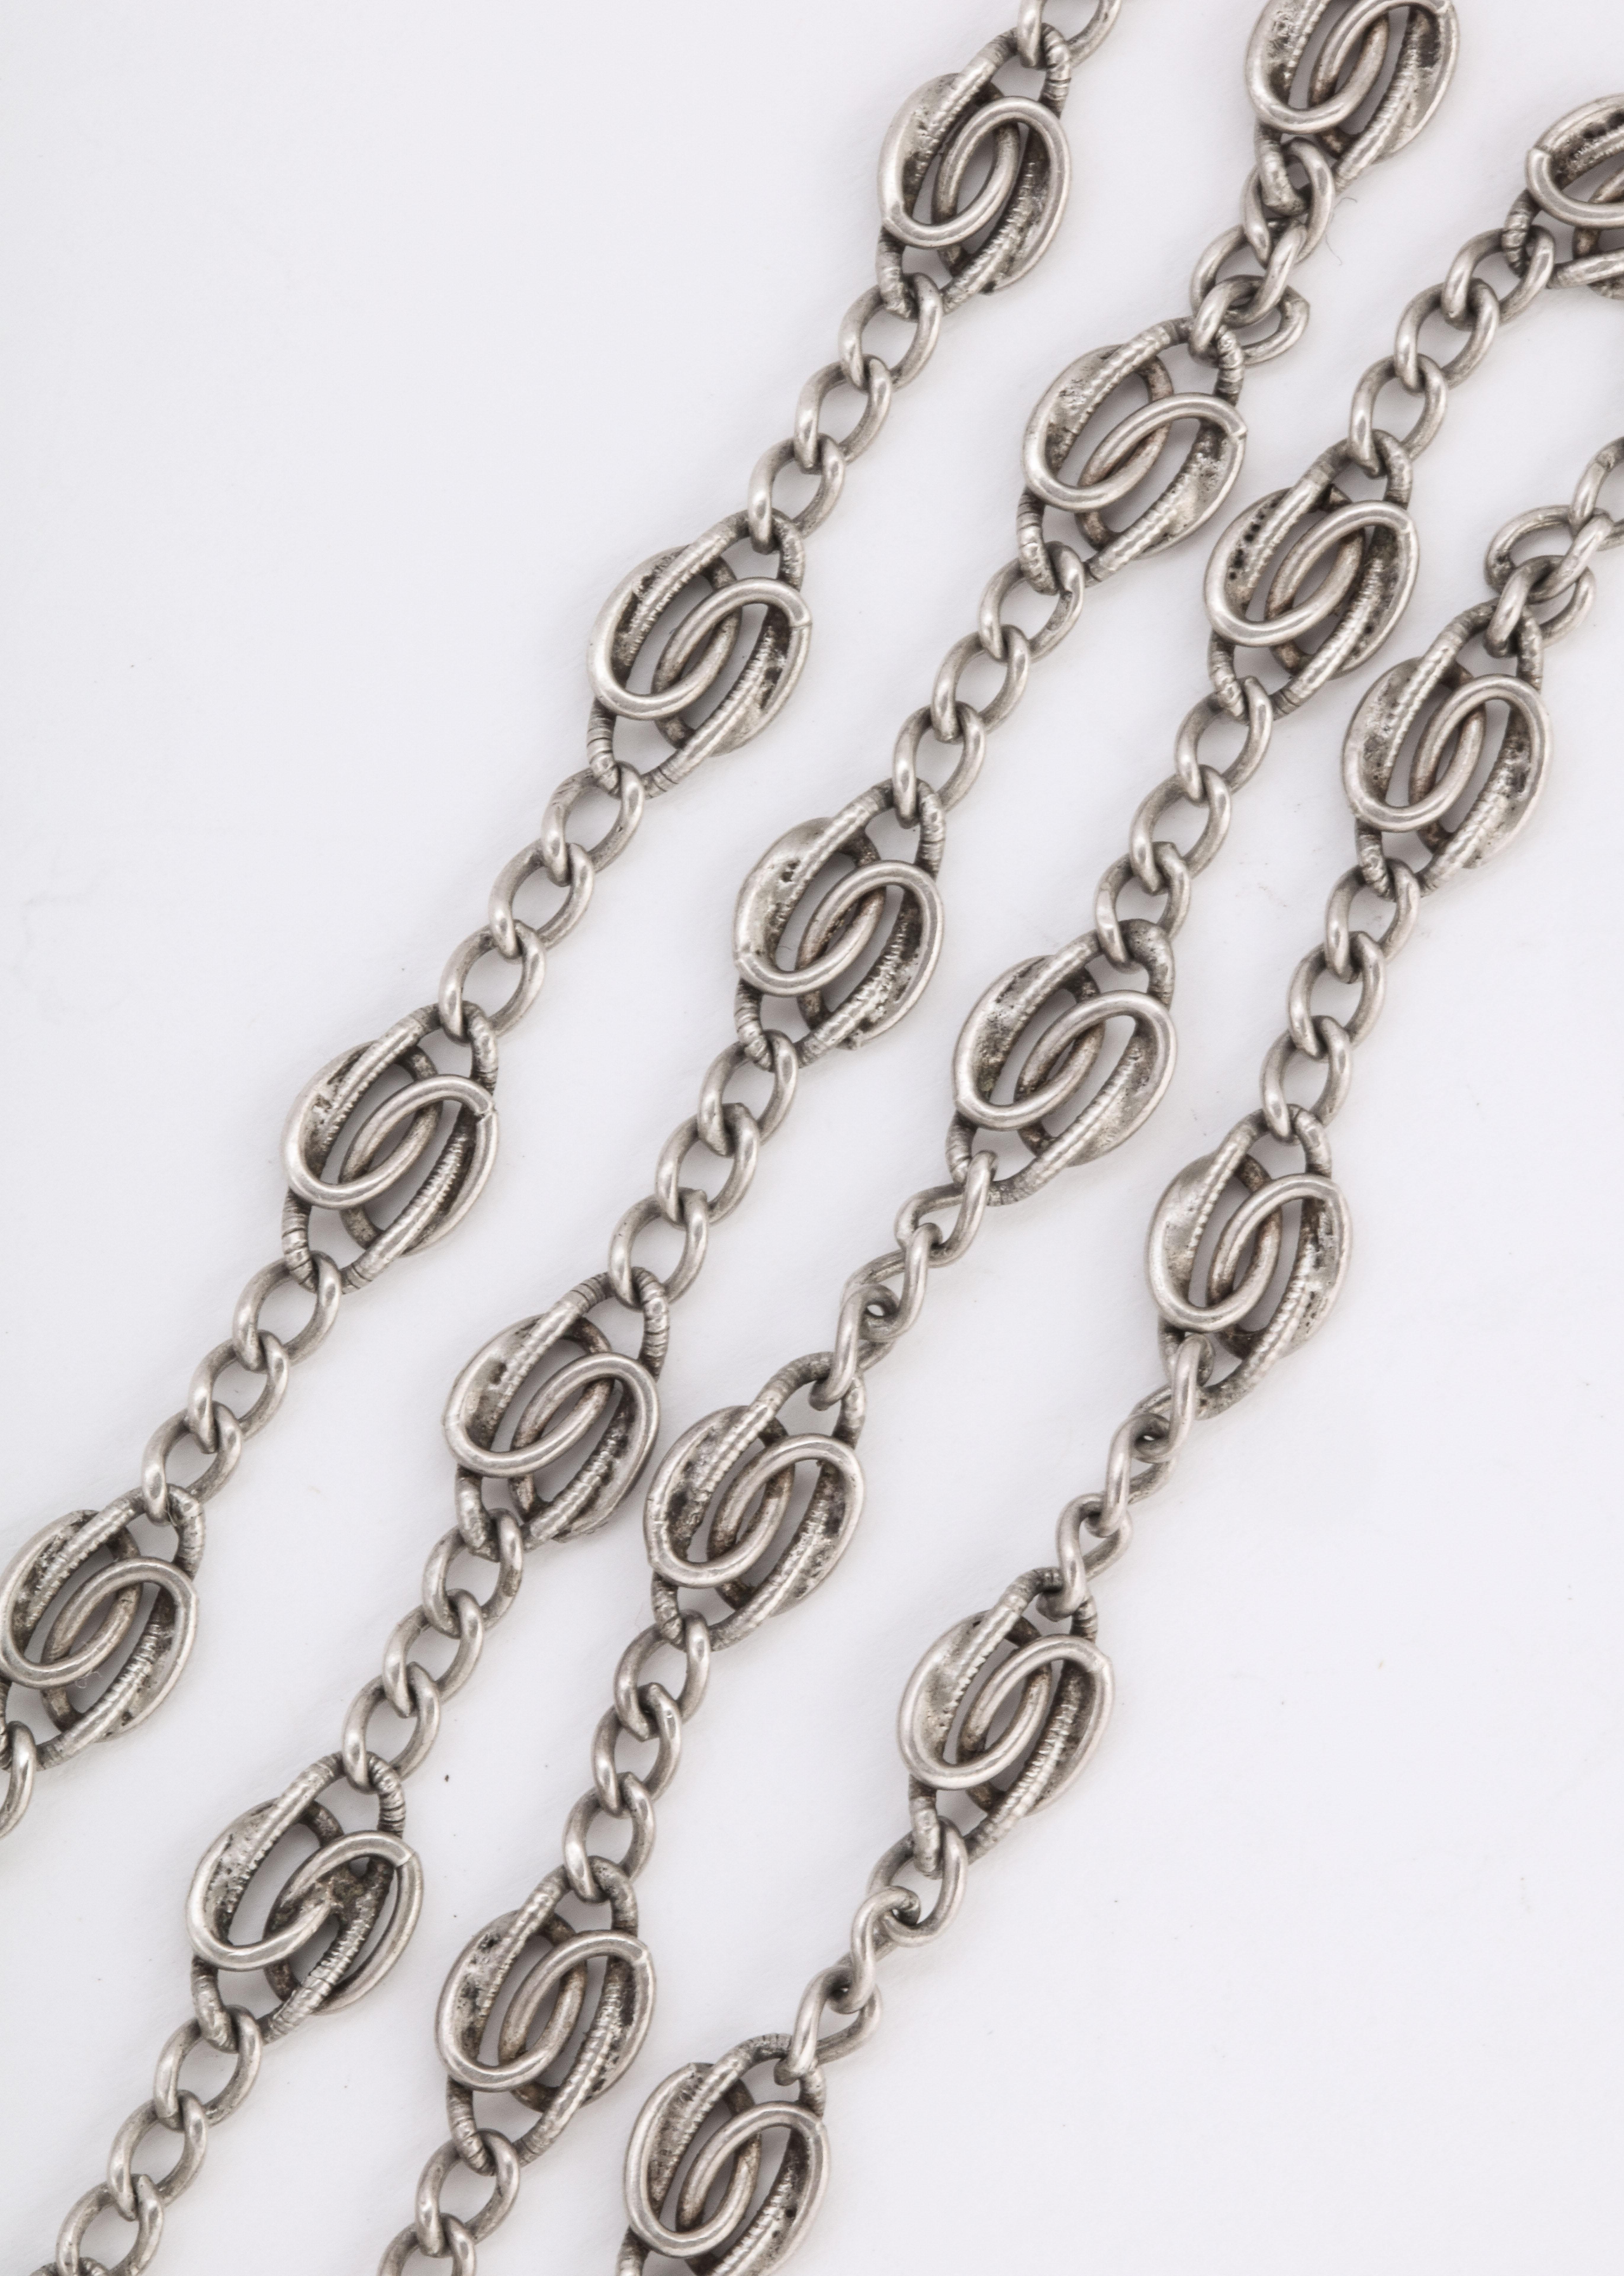 Sterling silver chains, such as this Edwardian French Long Chain, are popular because they have patina, texture and can be worn layered with other silver chains. I show a photo of a medium sized locket that can be added to it. This is jewelry that